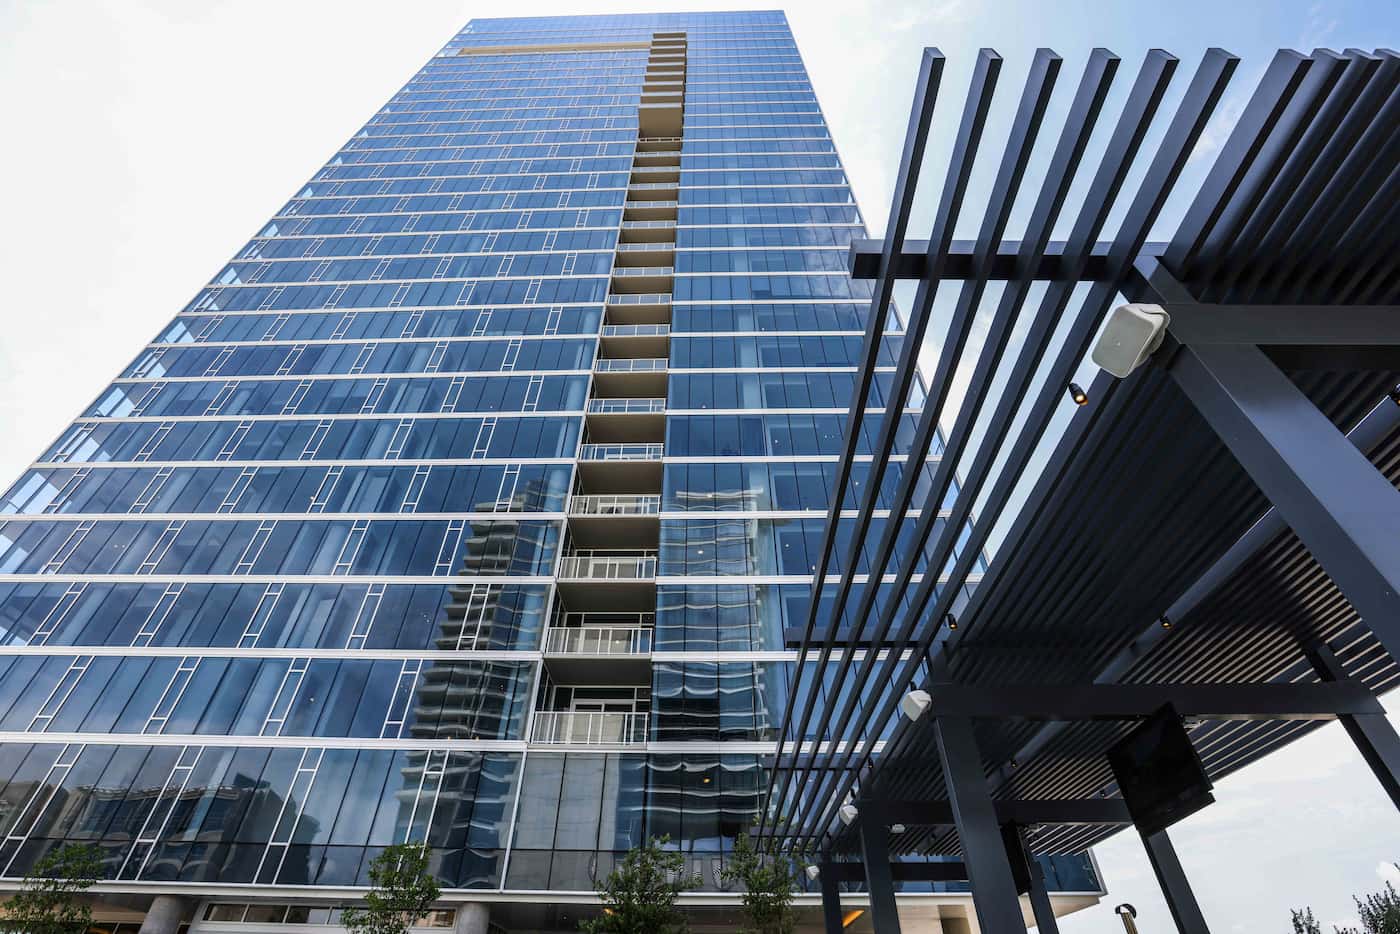 The Victor is Victory Park's tallest high-rise. (Lola Gomez/The Dallas Morning News)